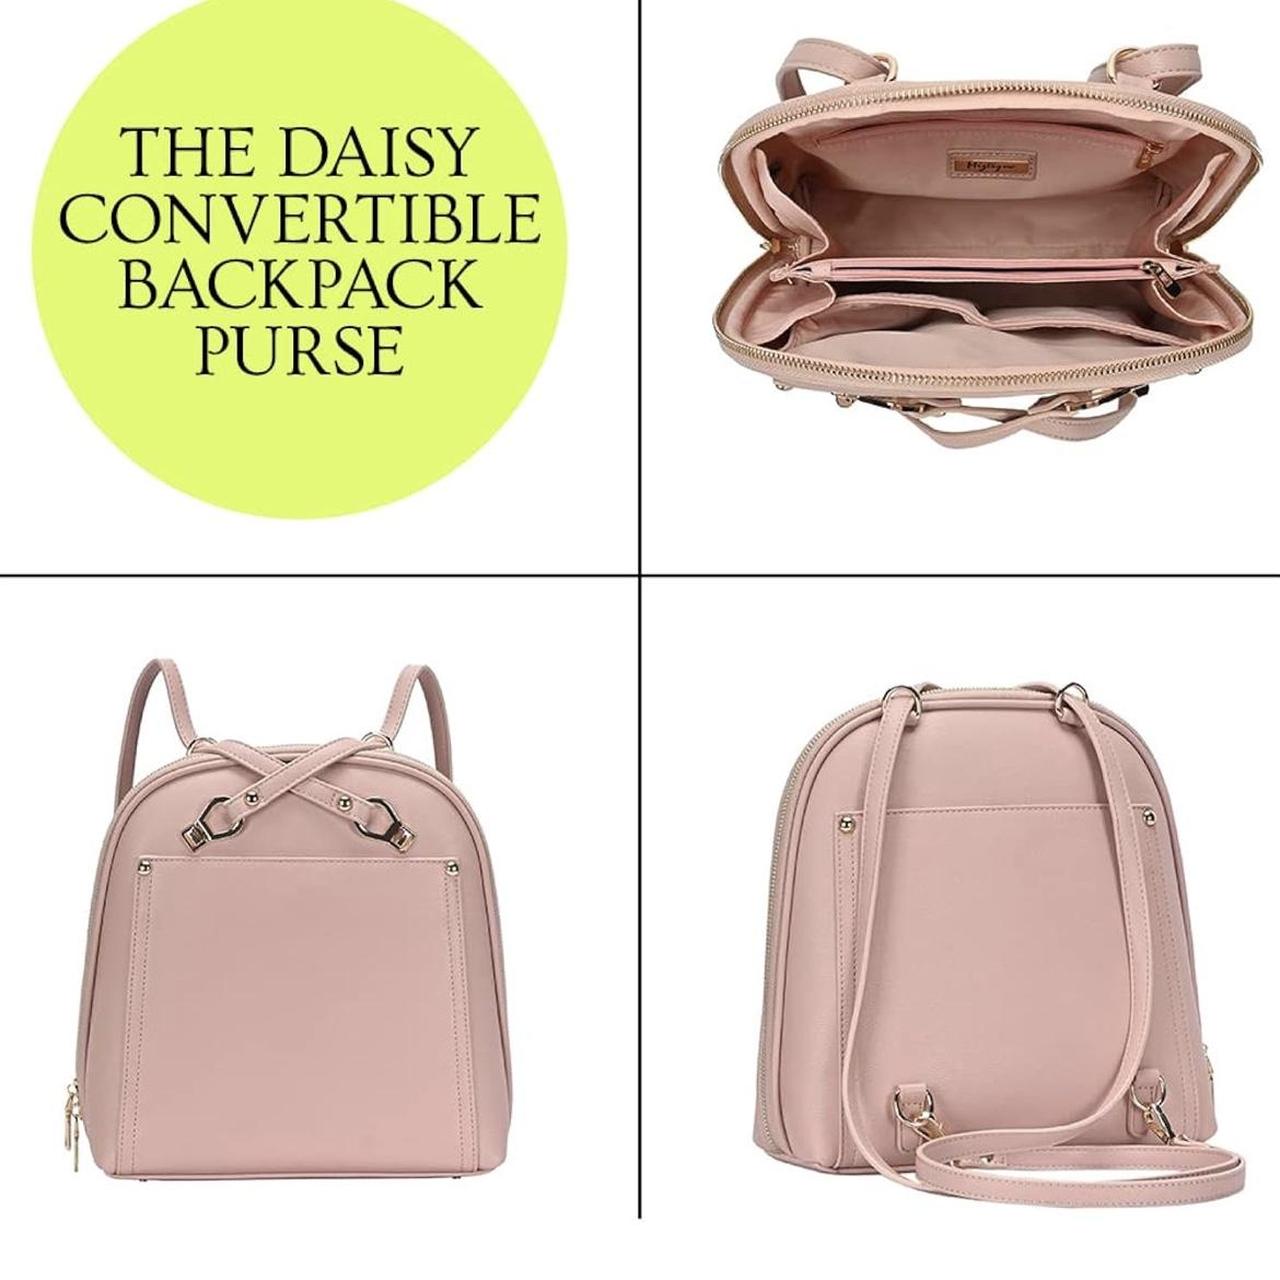 Miztique - The Daisy Convertible Backpack 